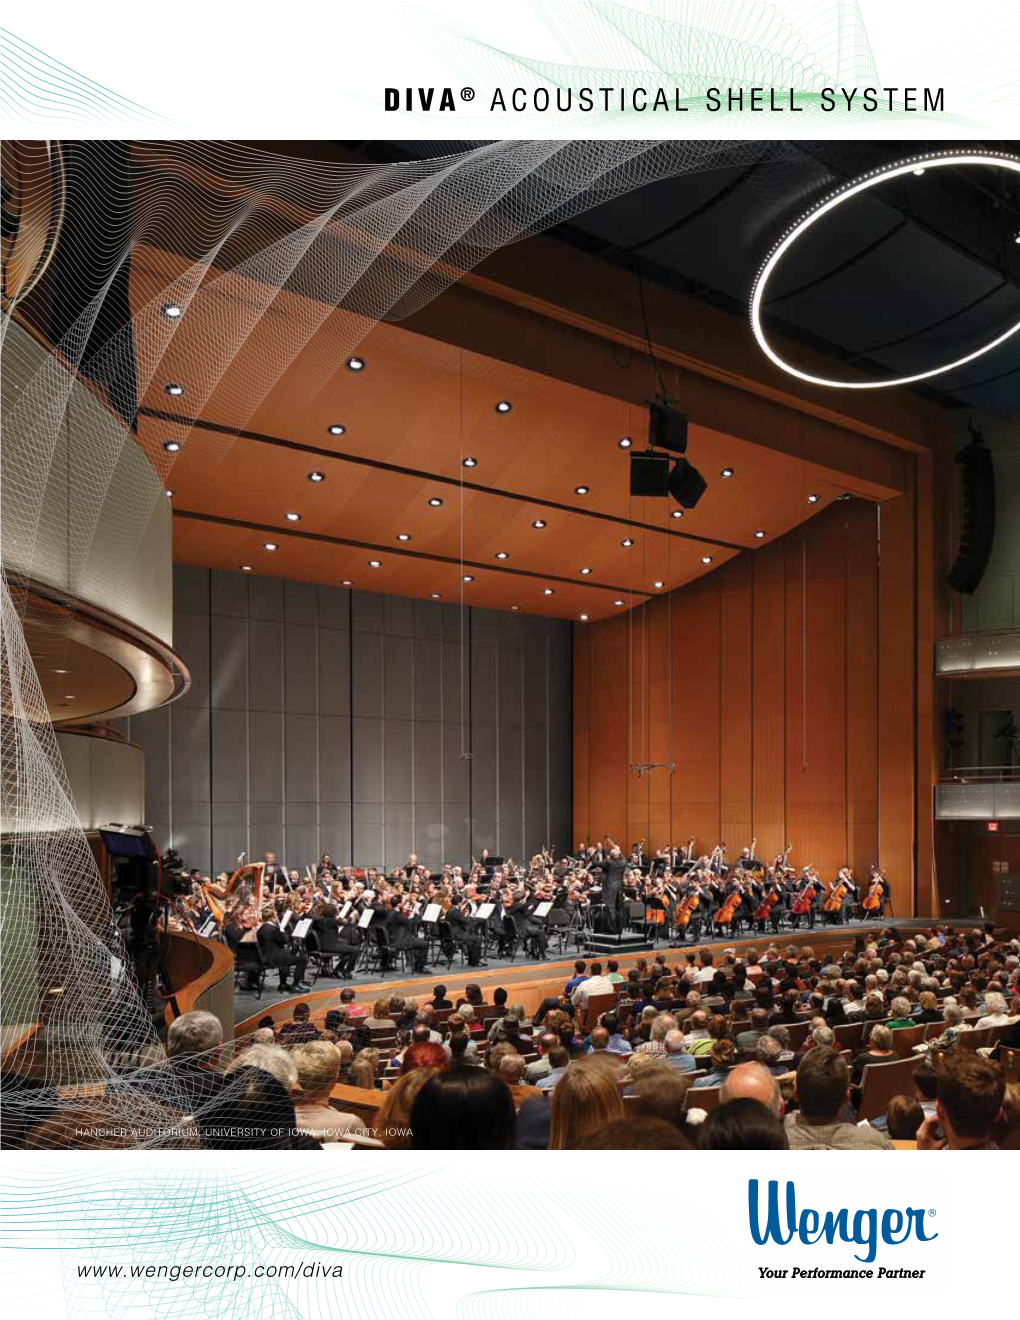 Diva® Acoustical Shell System